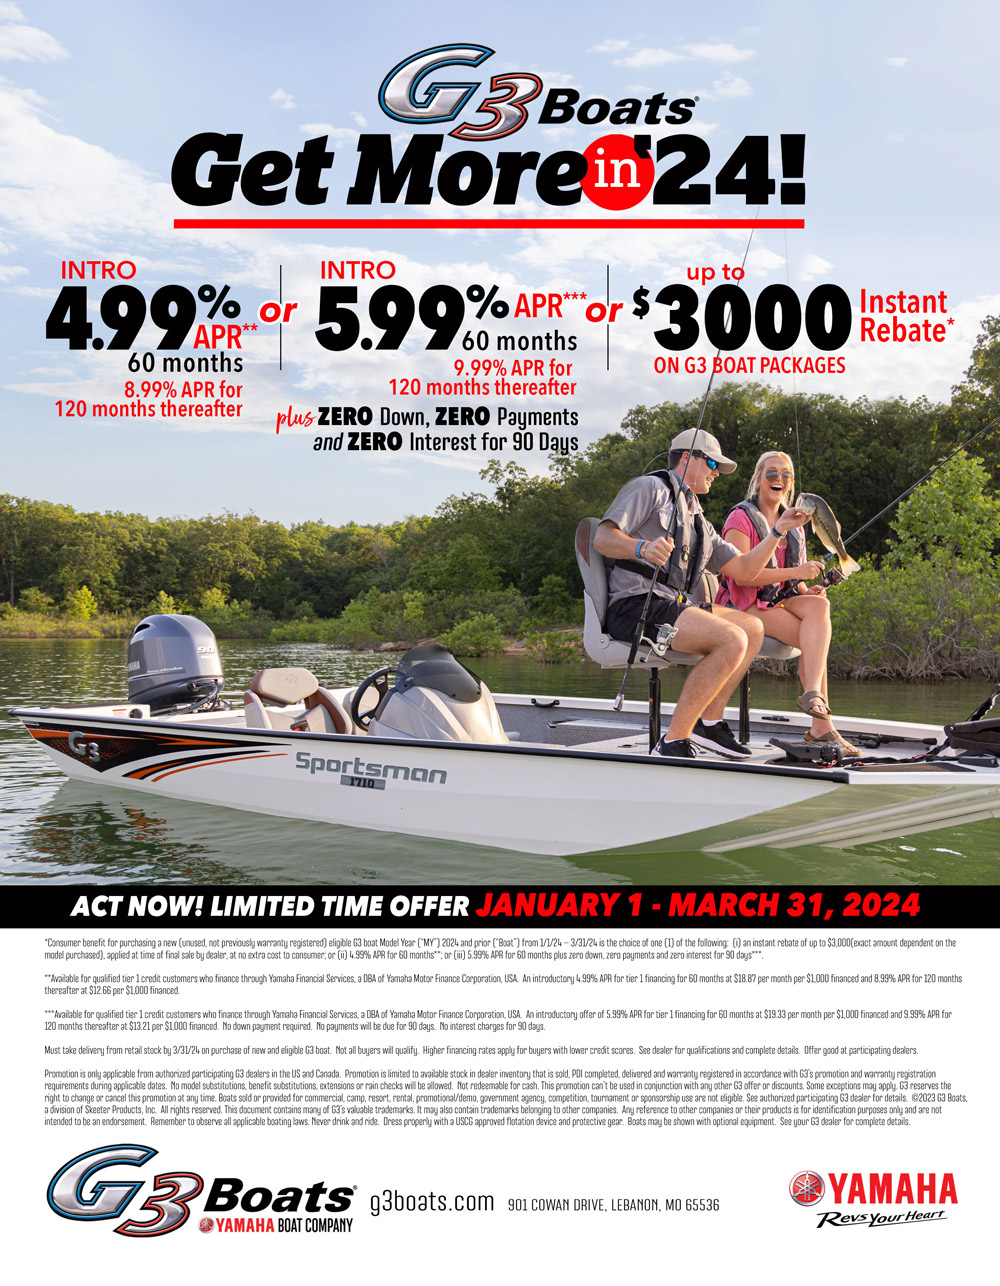 2024 G3 Boat Sales Event at Apopka Marine Services Boats in Inverness Florida